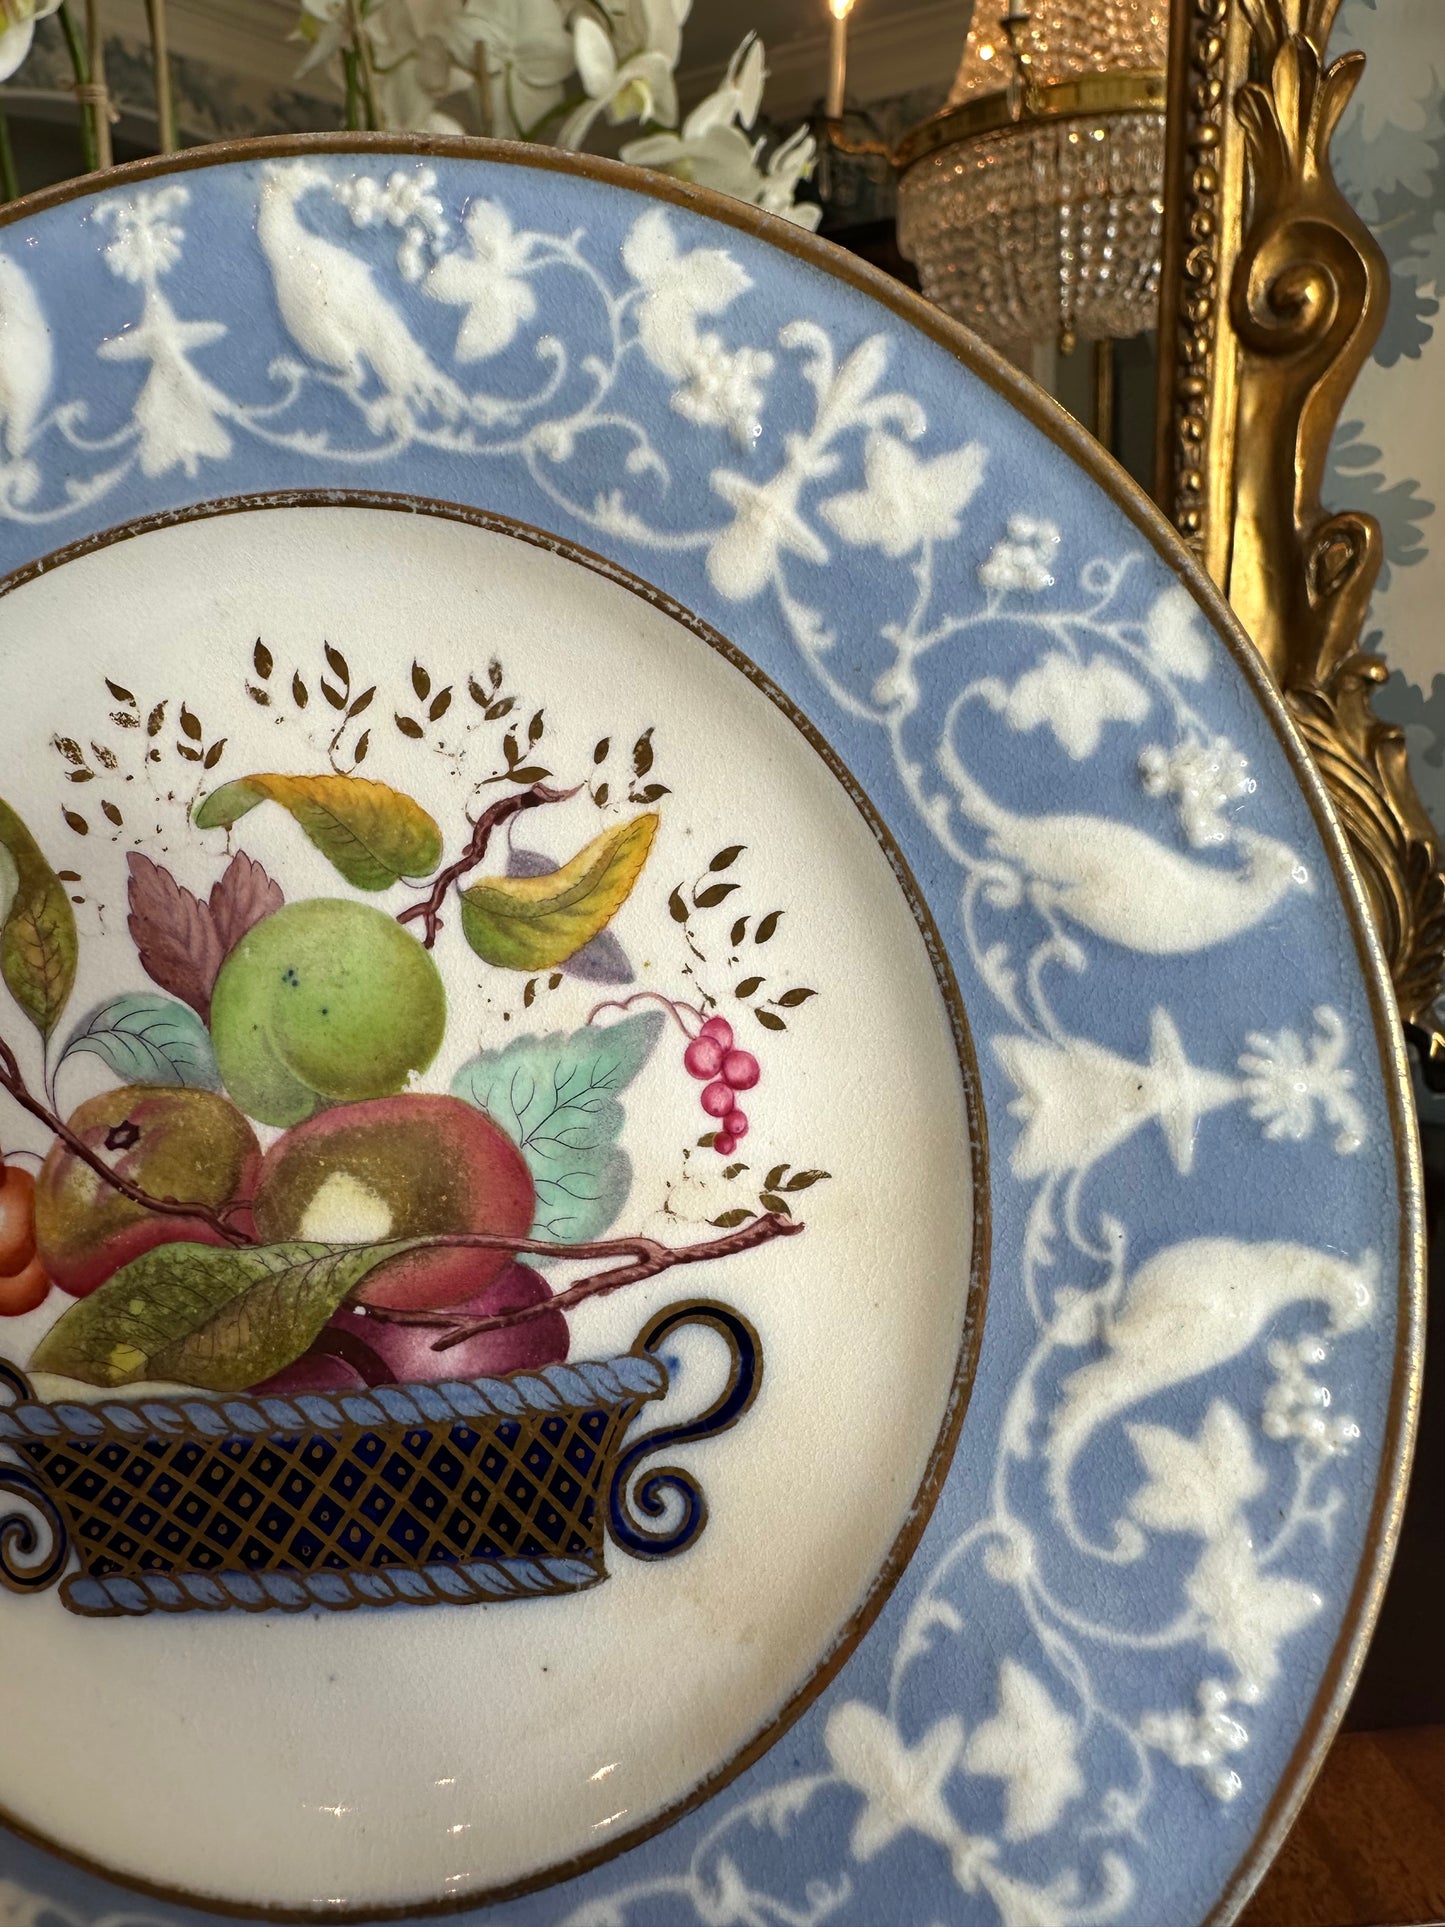 Fabulous Set of 3 Early 19thc Newhall English Lavender Blue Fruit Plates